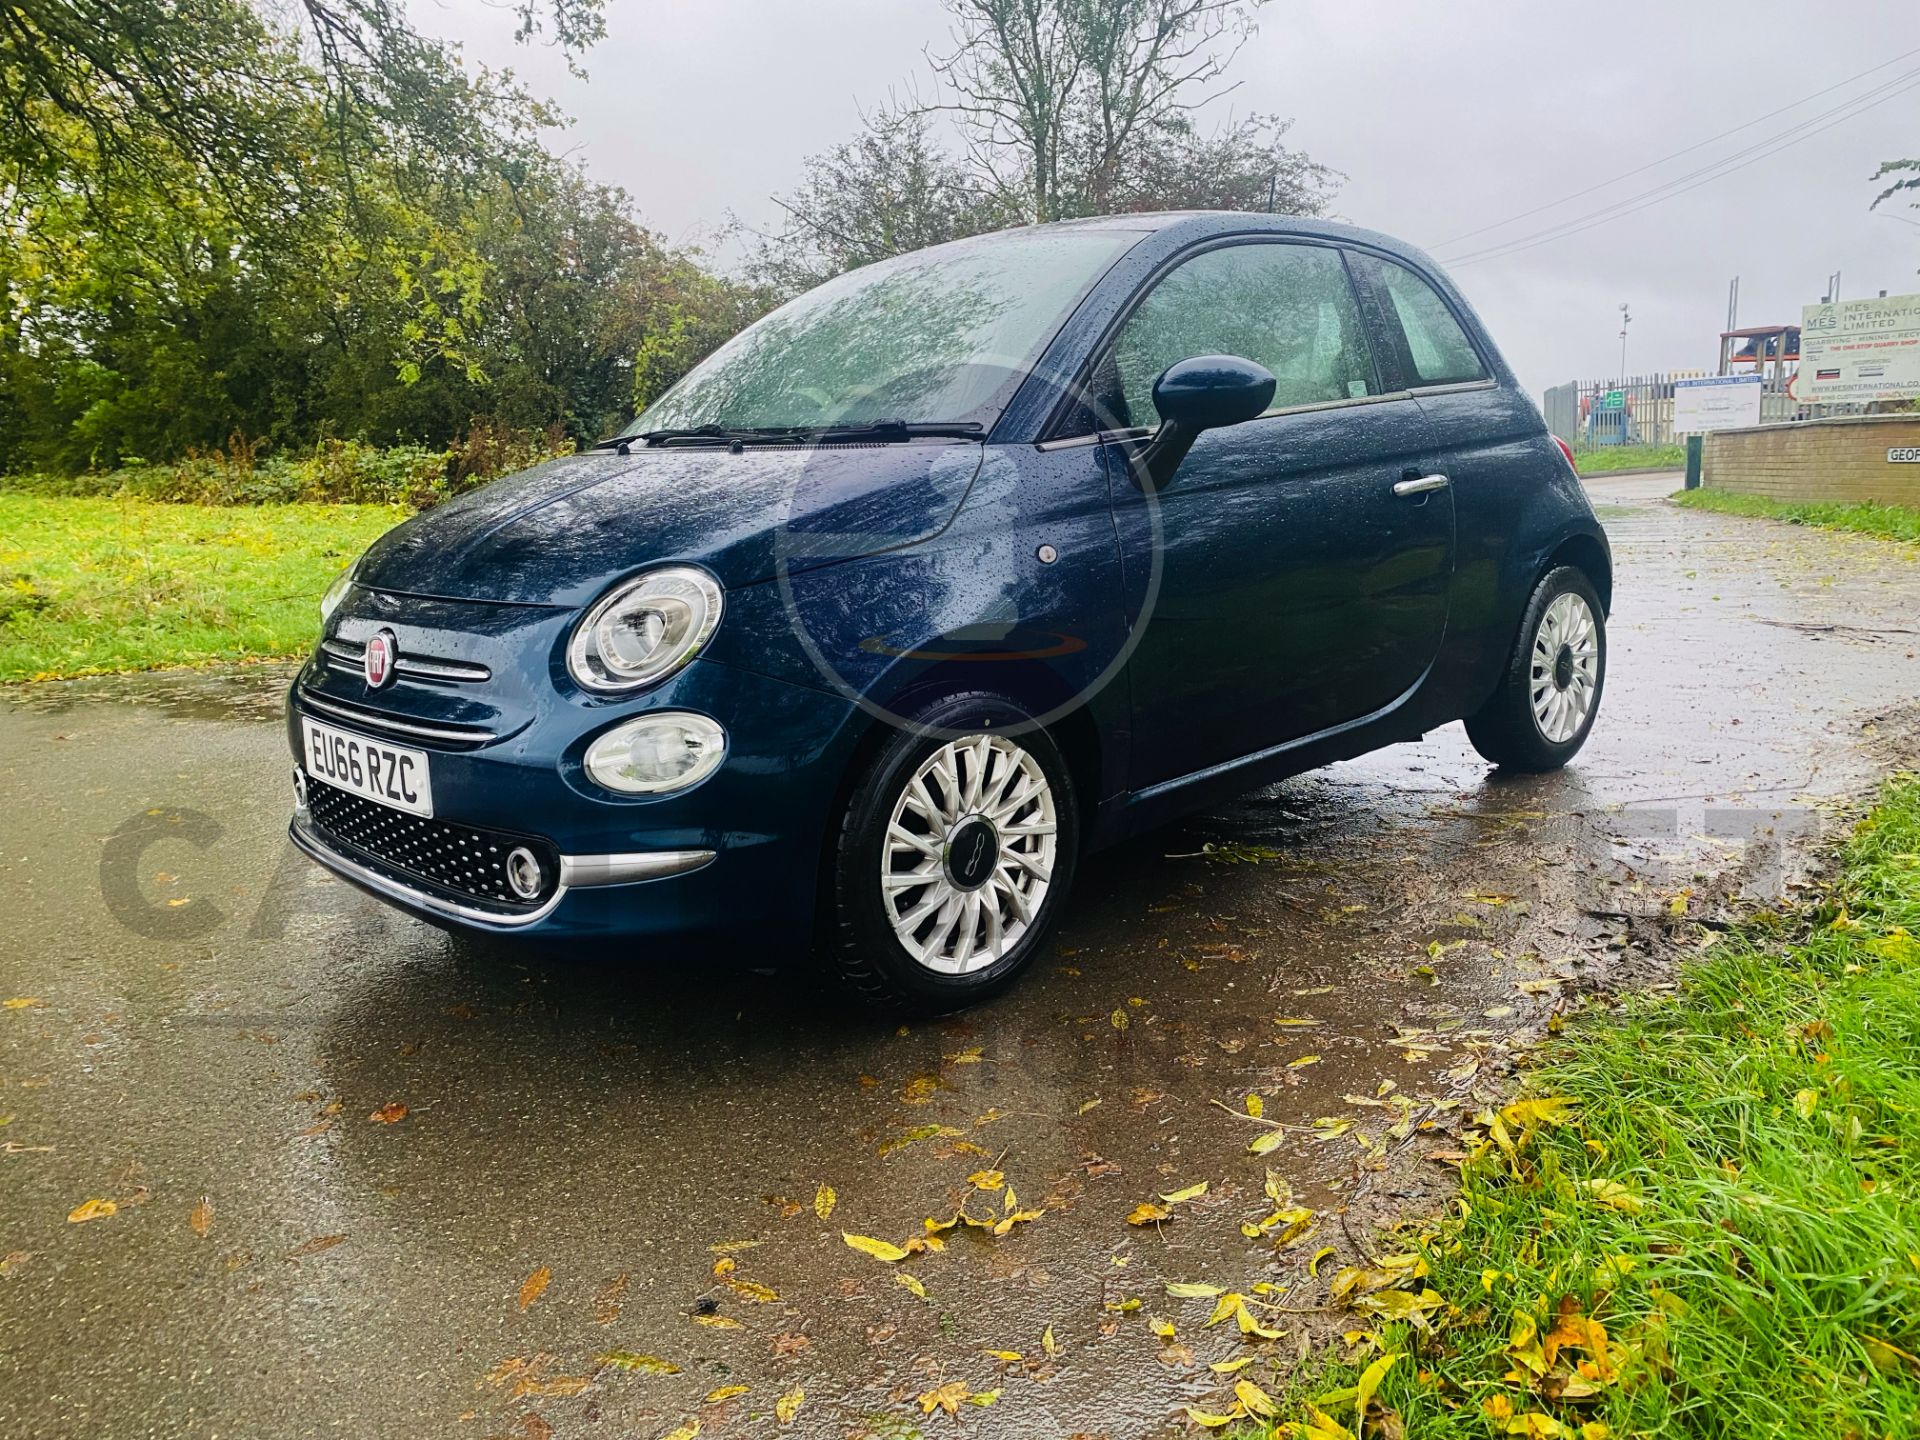 (ON SALE) FIAT 500 LOUNGE 1.3 PETROL STOP/START EURO 6 *AIRCON AND SAT NAV* ONLY 37k MILES-NO VAT!!! - Image 4 of 22